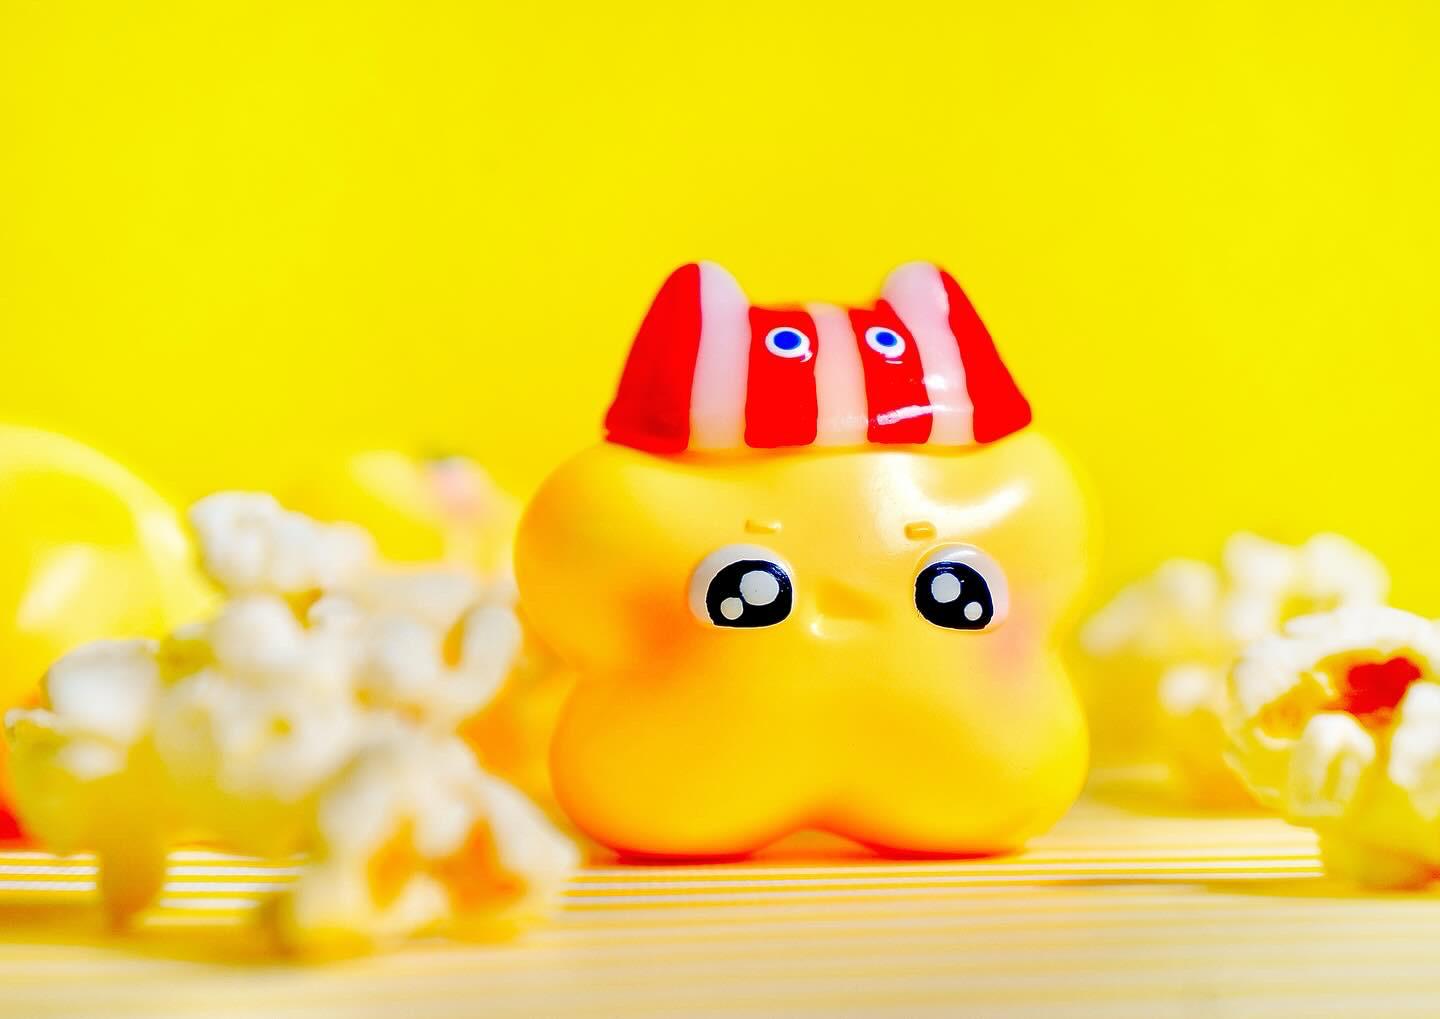 Popstar toy with red and white hat, popcorn, and candy close-up, baby toys, cartoon, animal figure, rubber ducky, and smiley details.